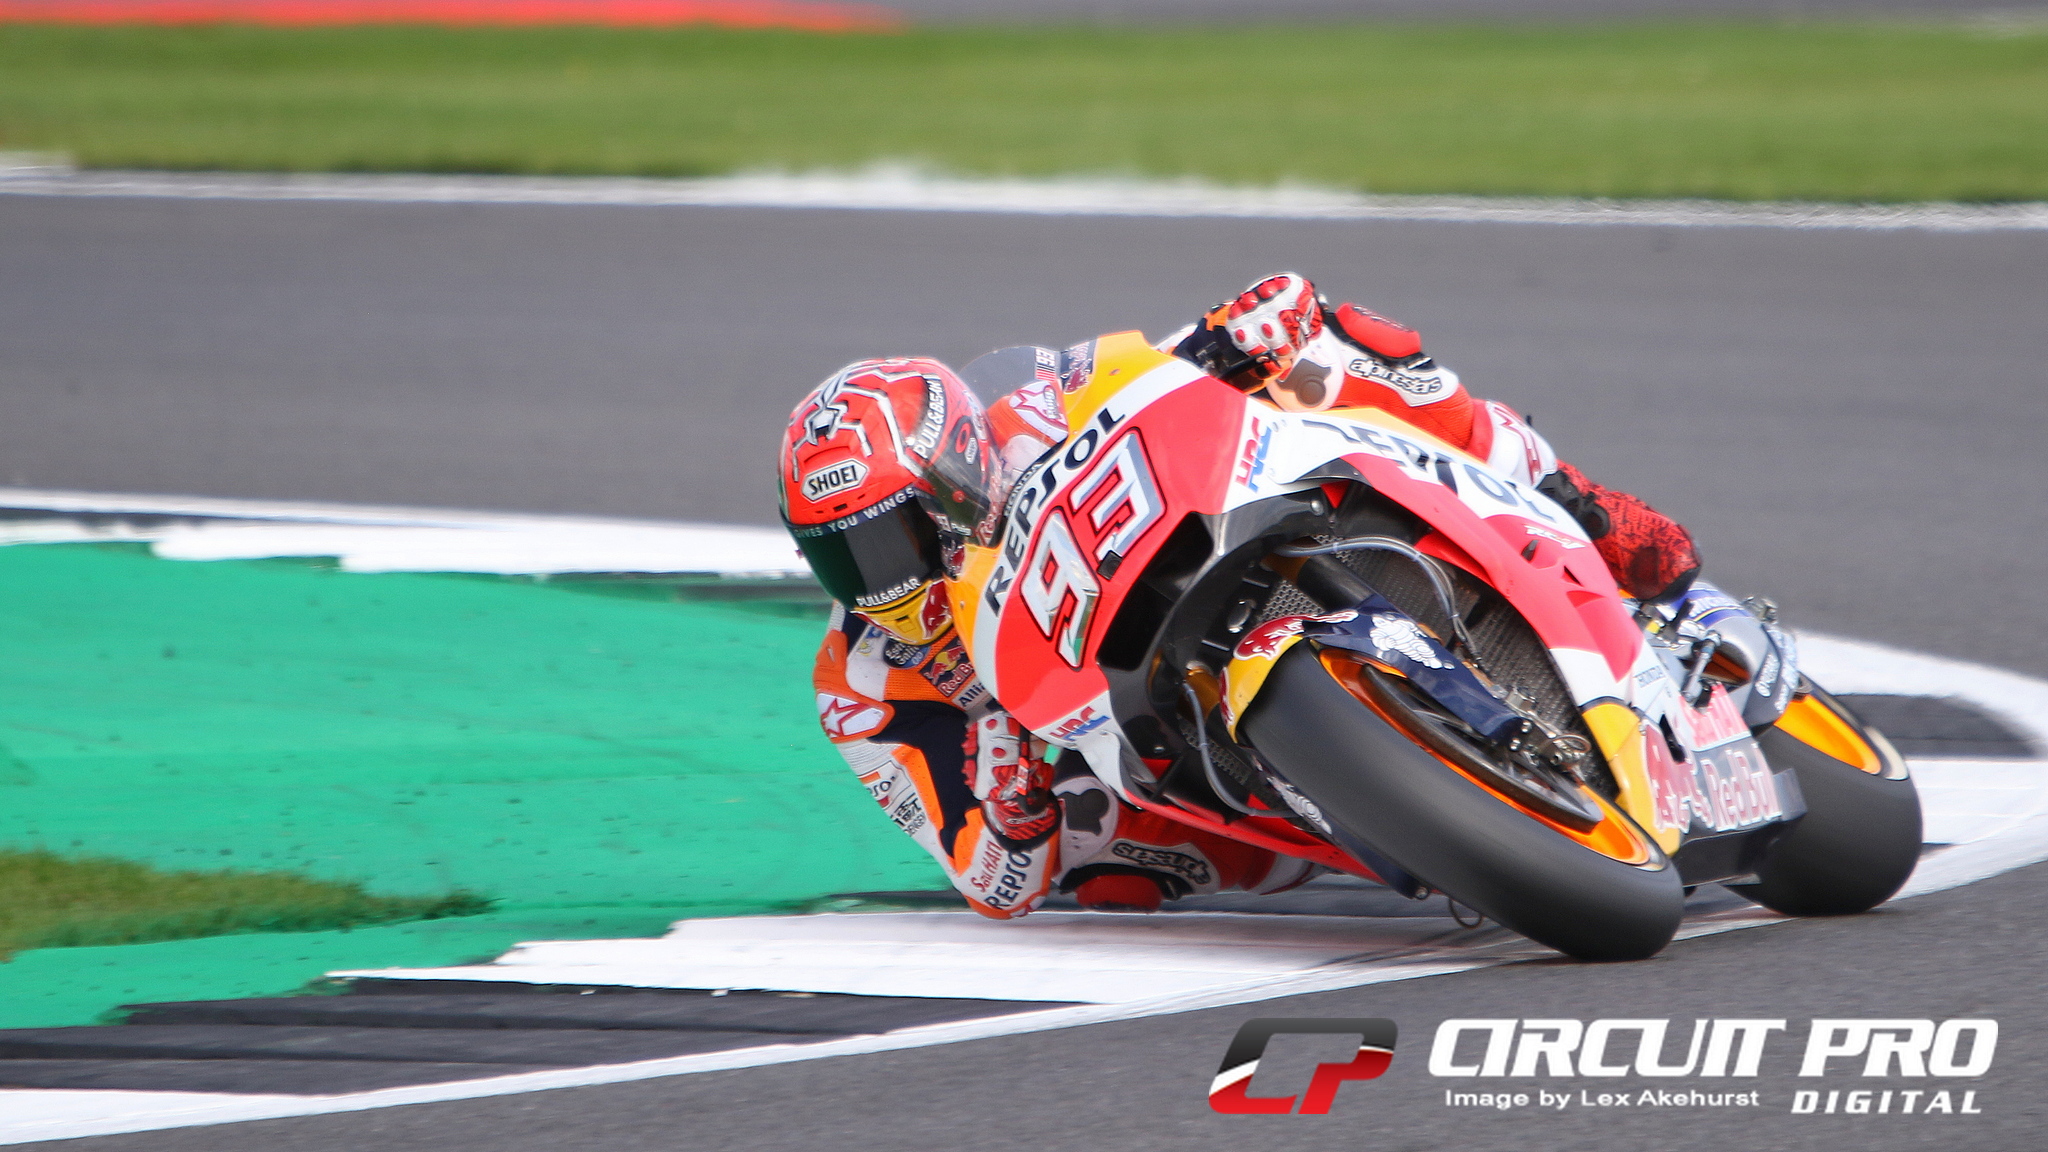 Silverstone Pole For Marquez By Less Than A Tenth After - Superbike Racing - HD Wallpaper 